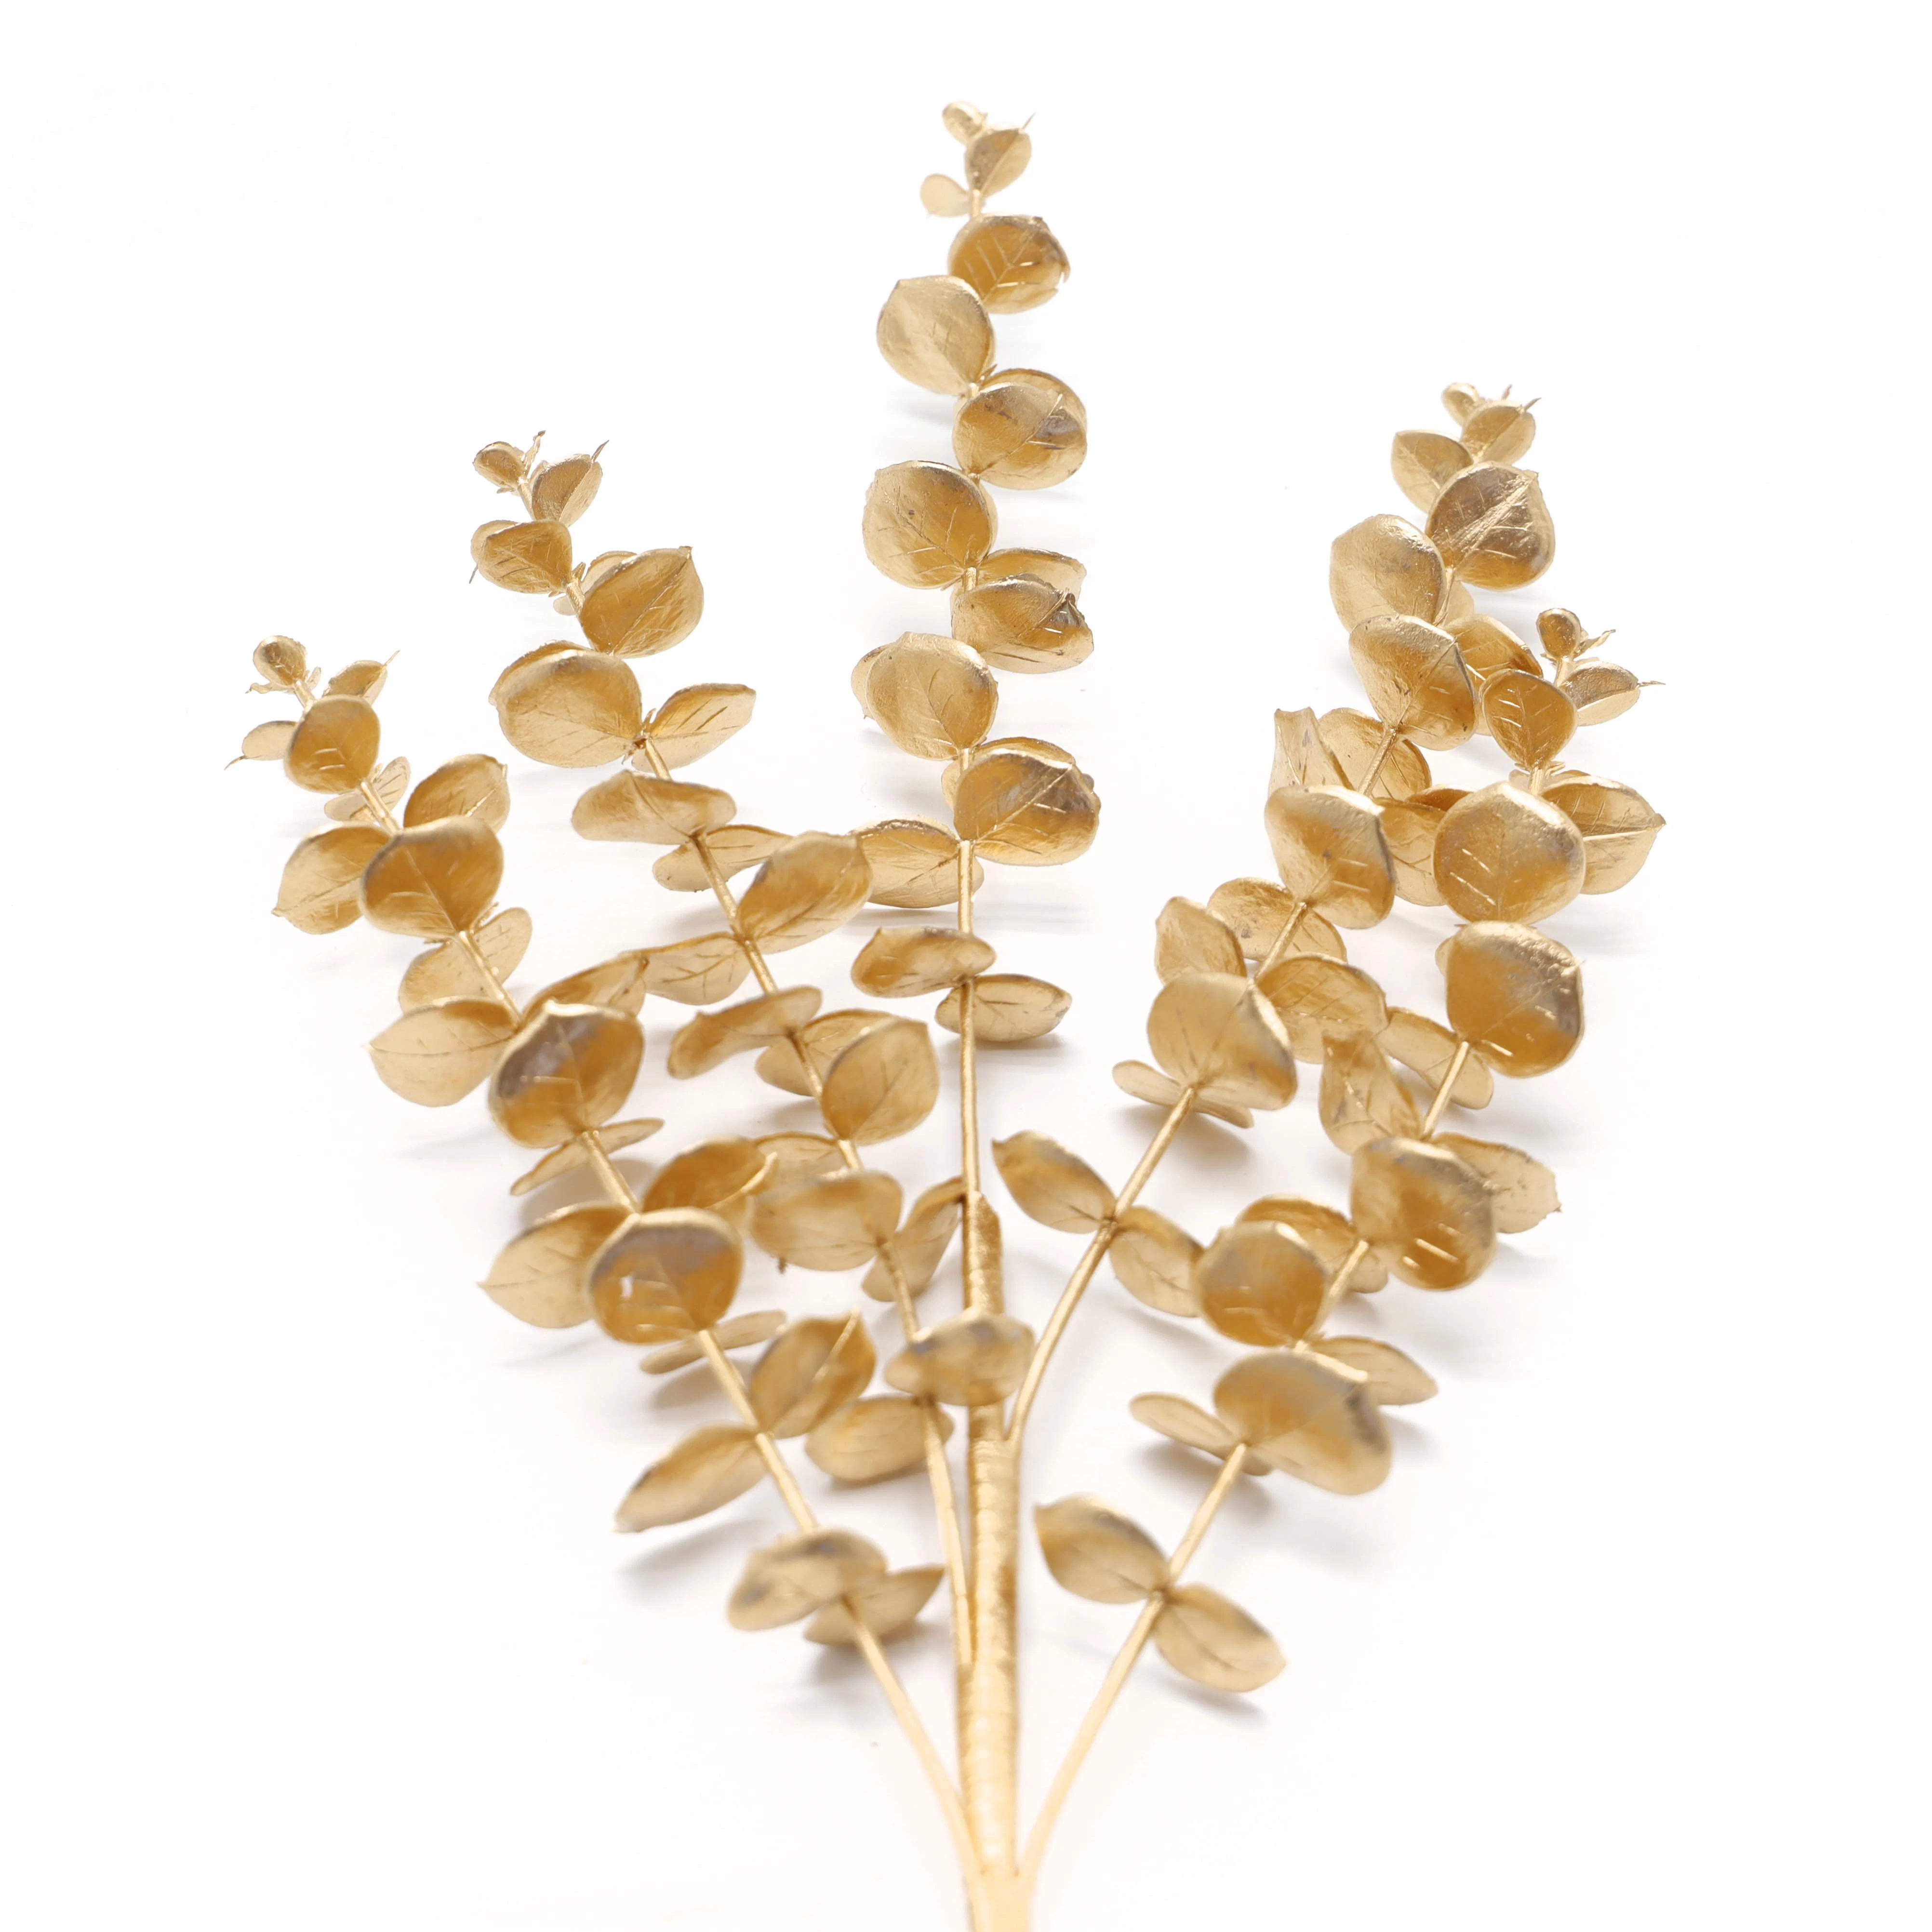 Wholesale/Supplier Gold Eucalyptus Leaves Artificial Flower Branches Christmas Decoration Gold Oil Cuttings Indoor and Outdoor Decorations